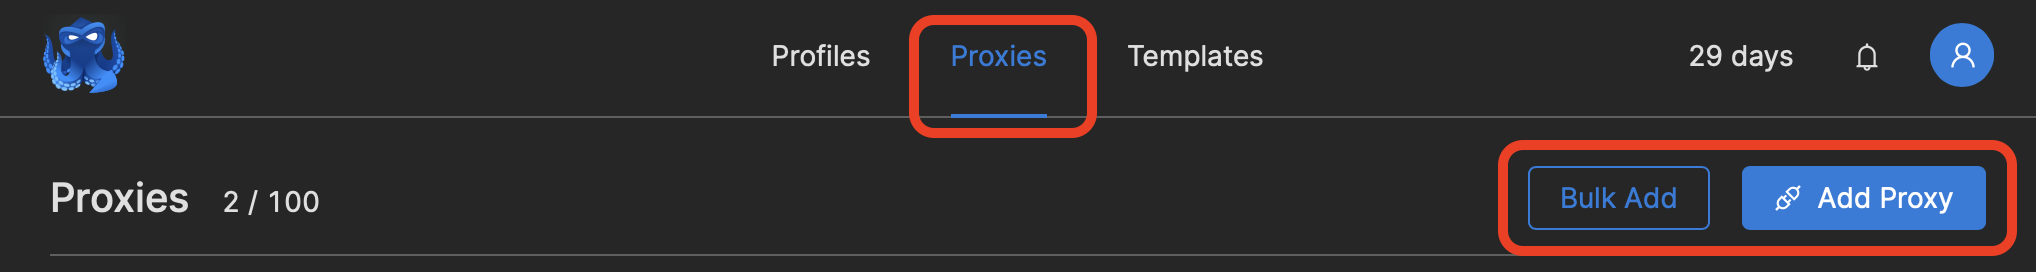 Octo Browser – Adding proxies